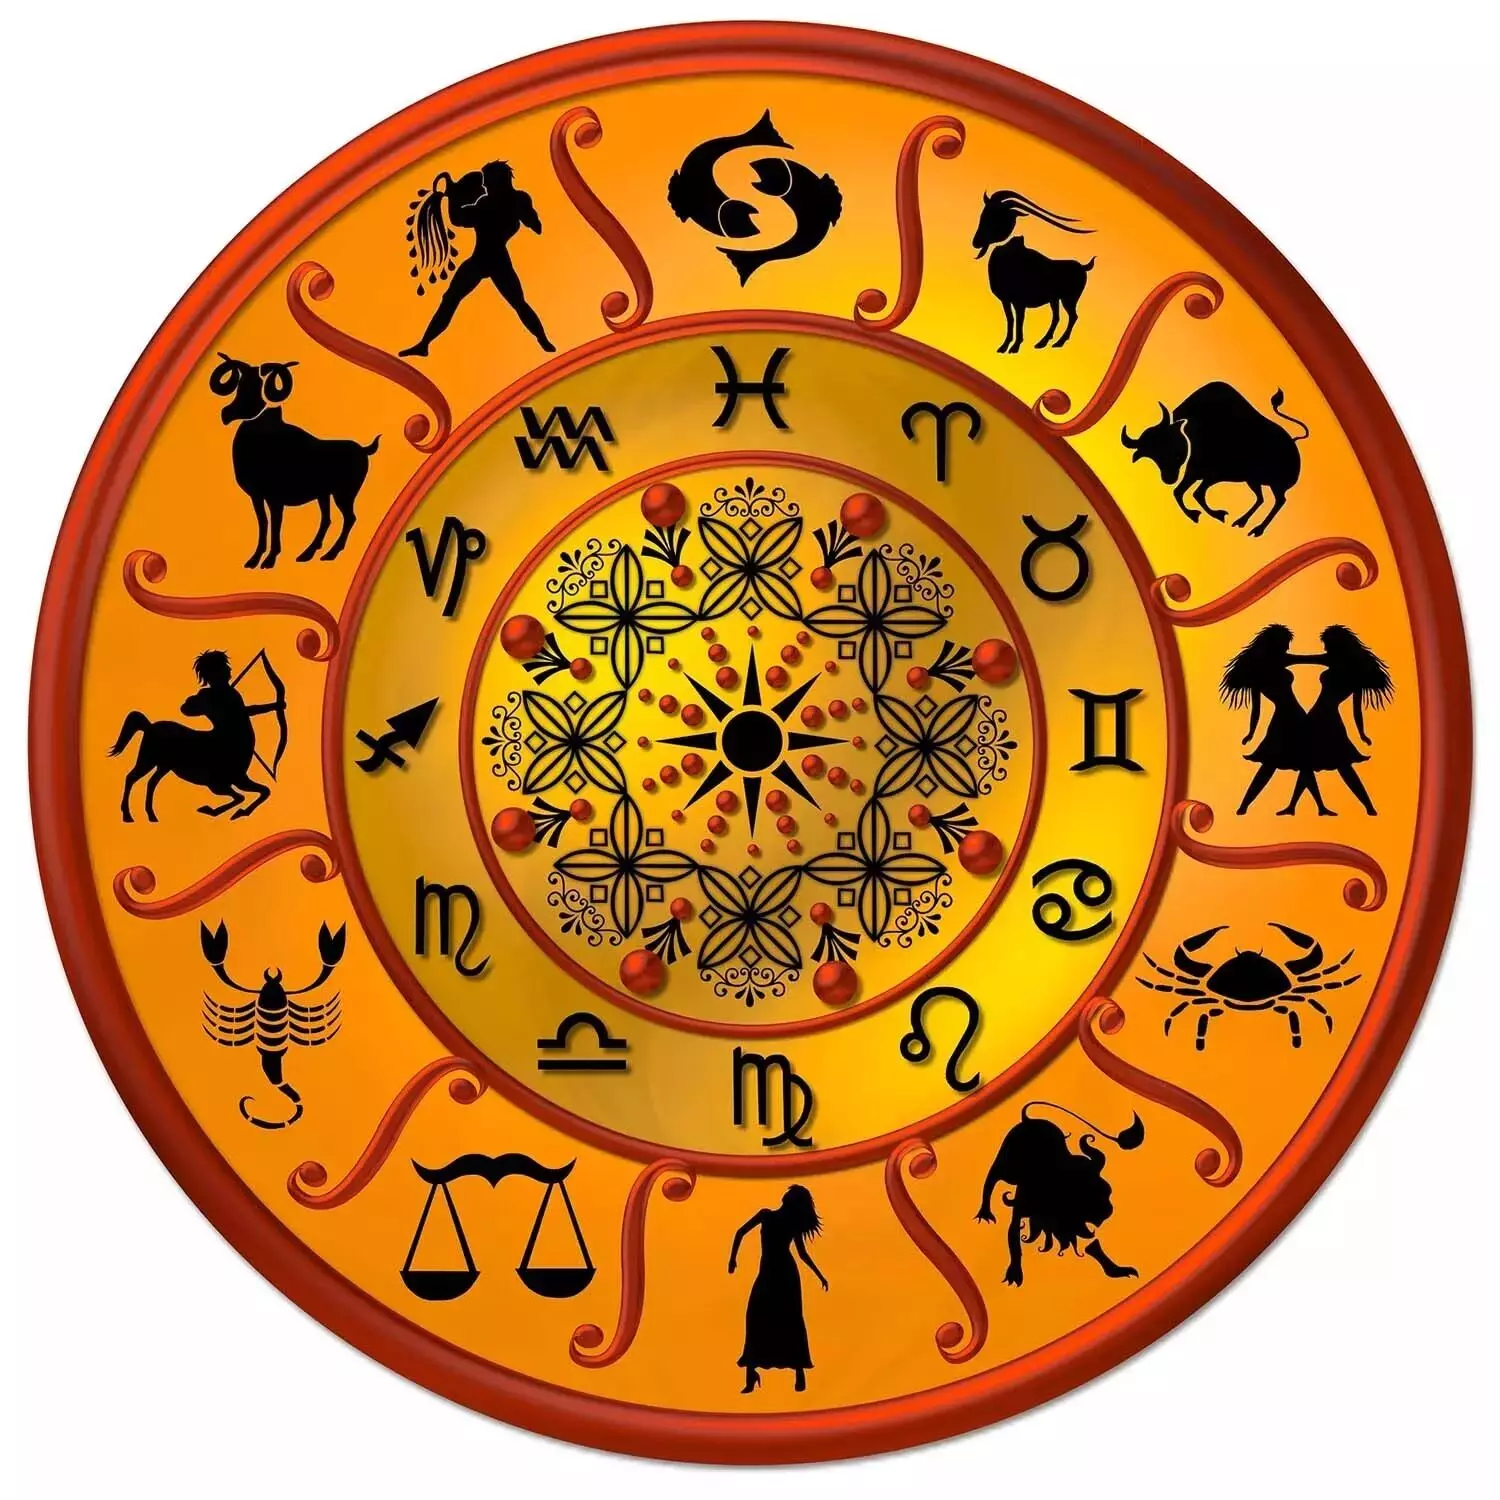 02 September  – Know your todays horoscope